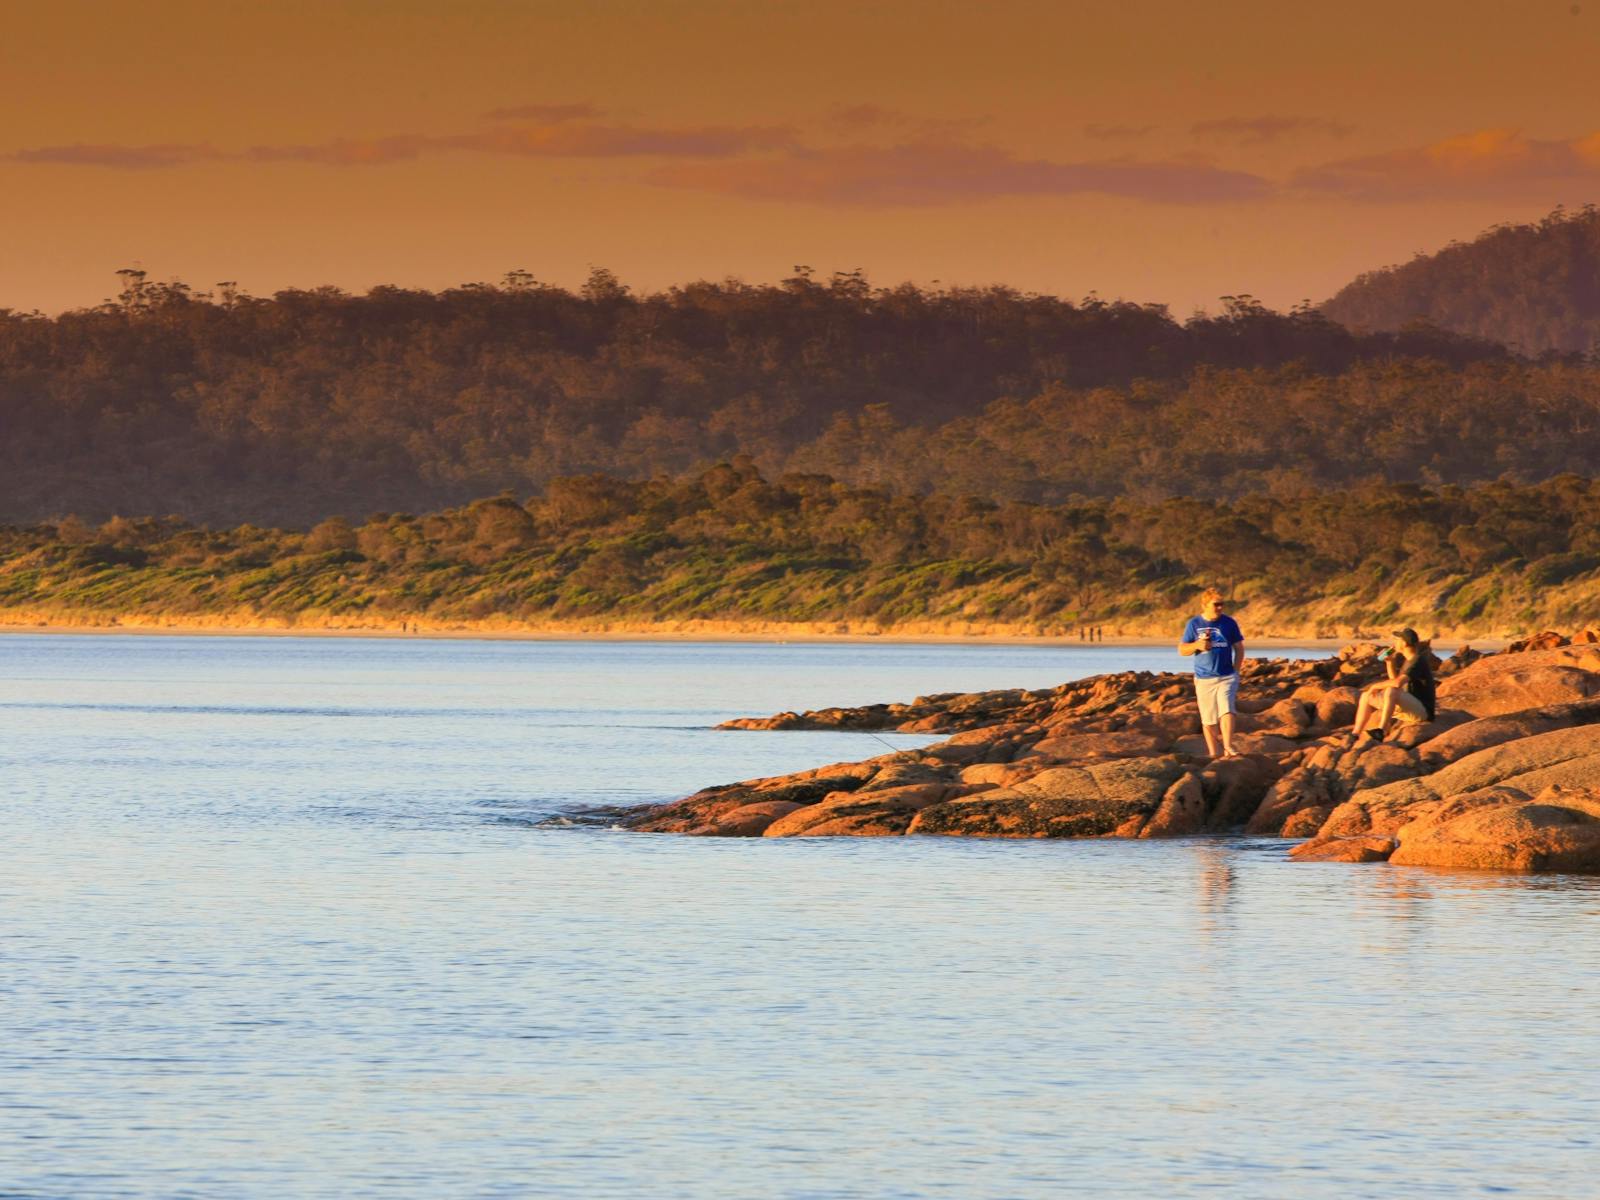 Fishing from shore - Foreshore between Pirates Cove and Jetty